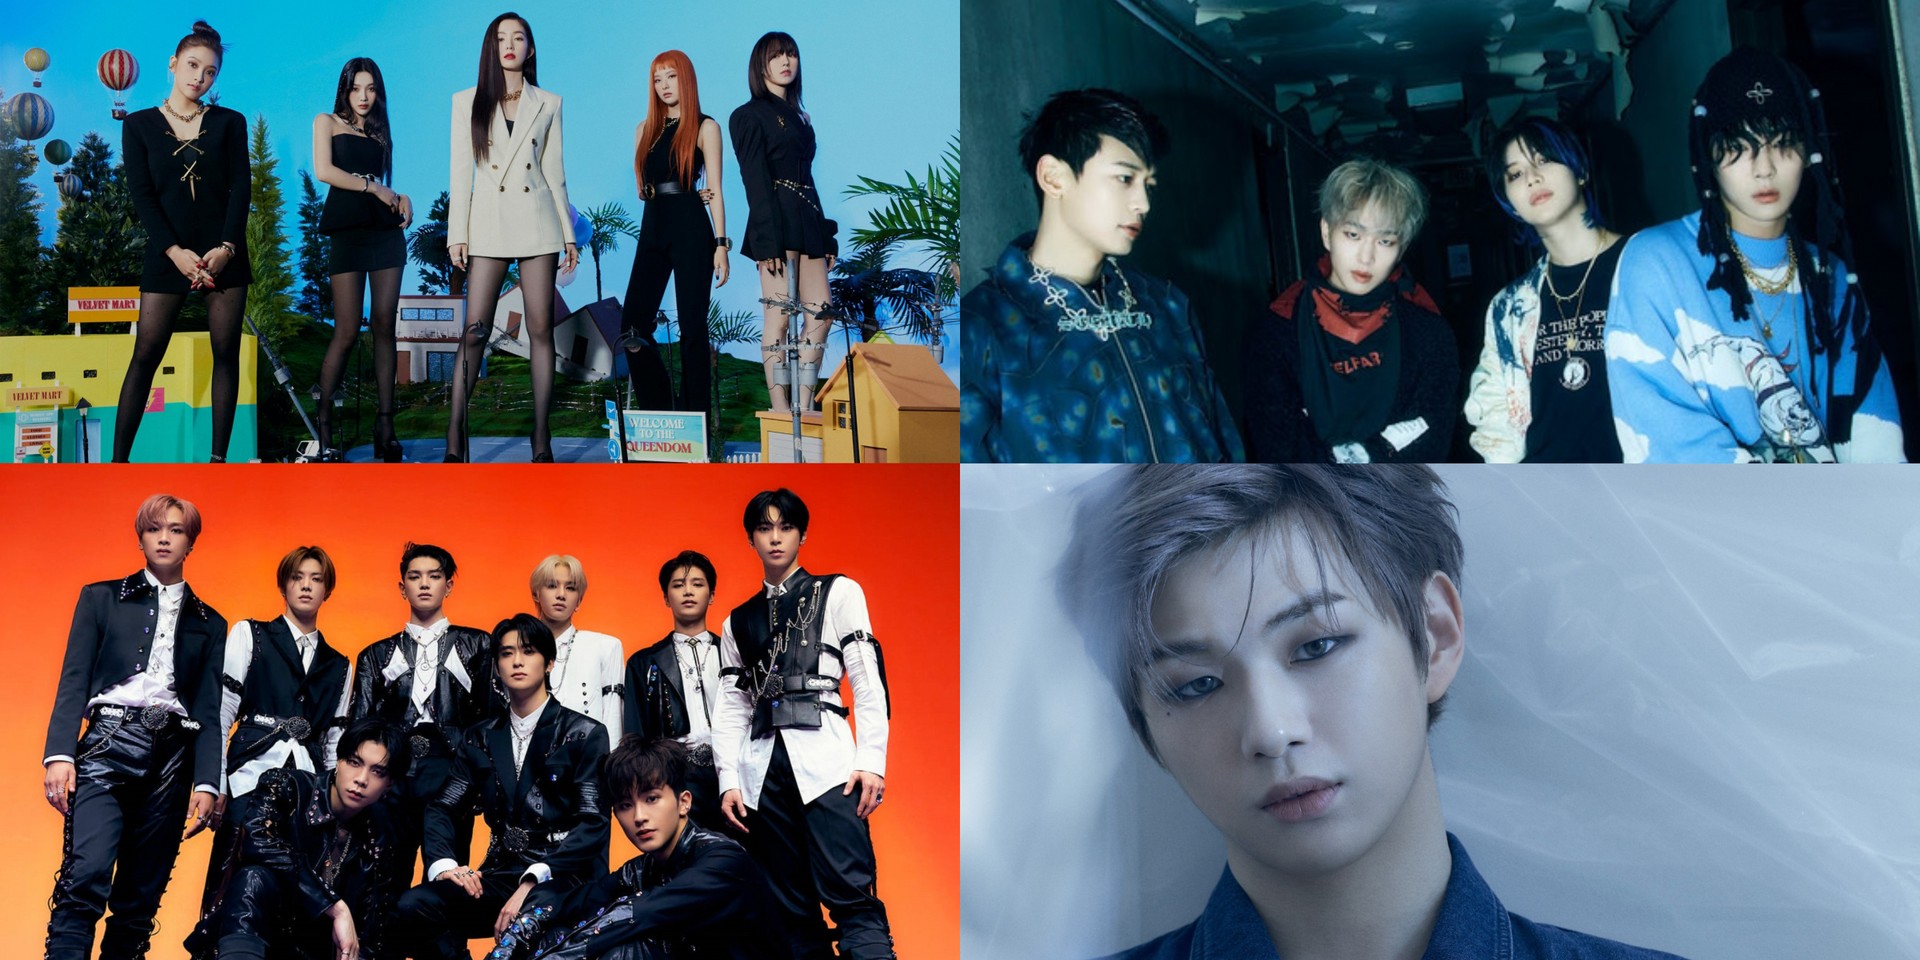  11th Gaon Chart Music Awards announces lineup - SHINee, Red Velvet, NCT 127, Kang Daniel, and more